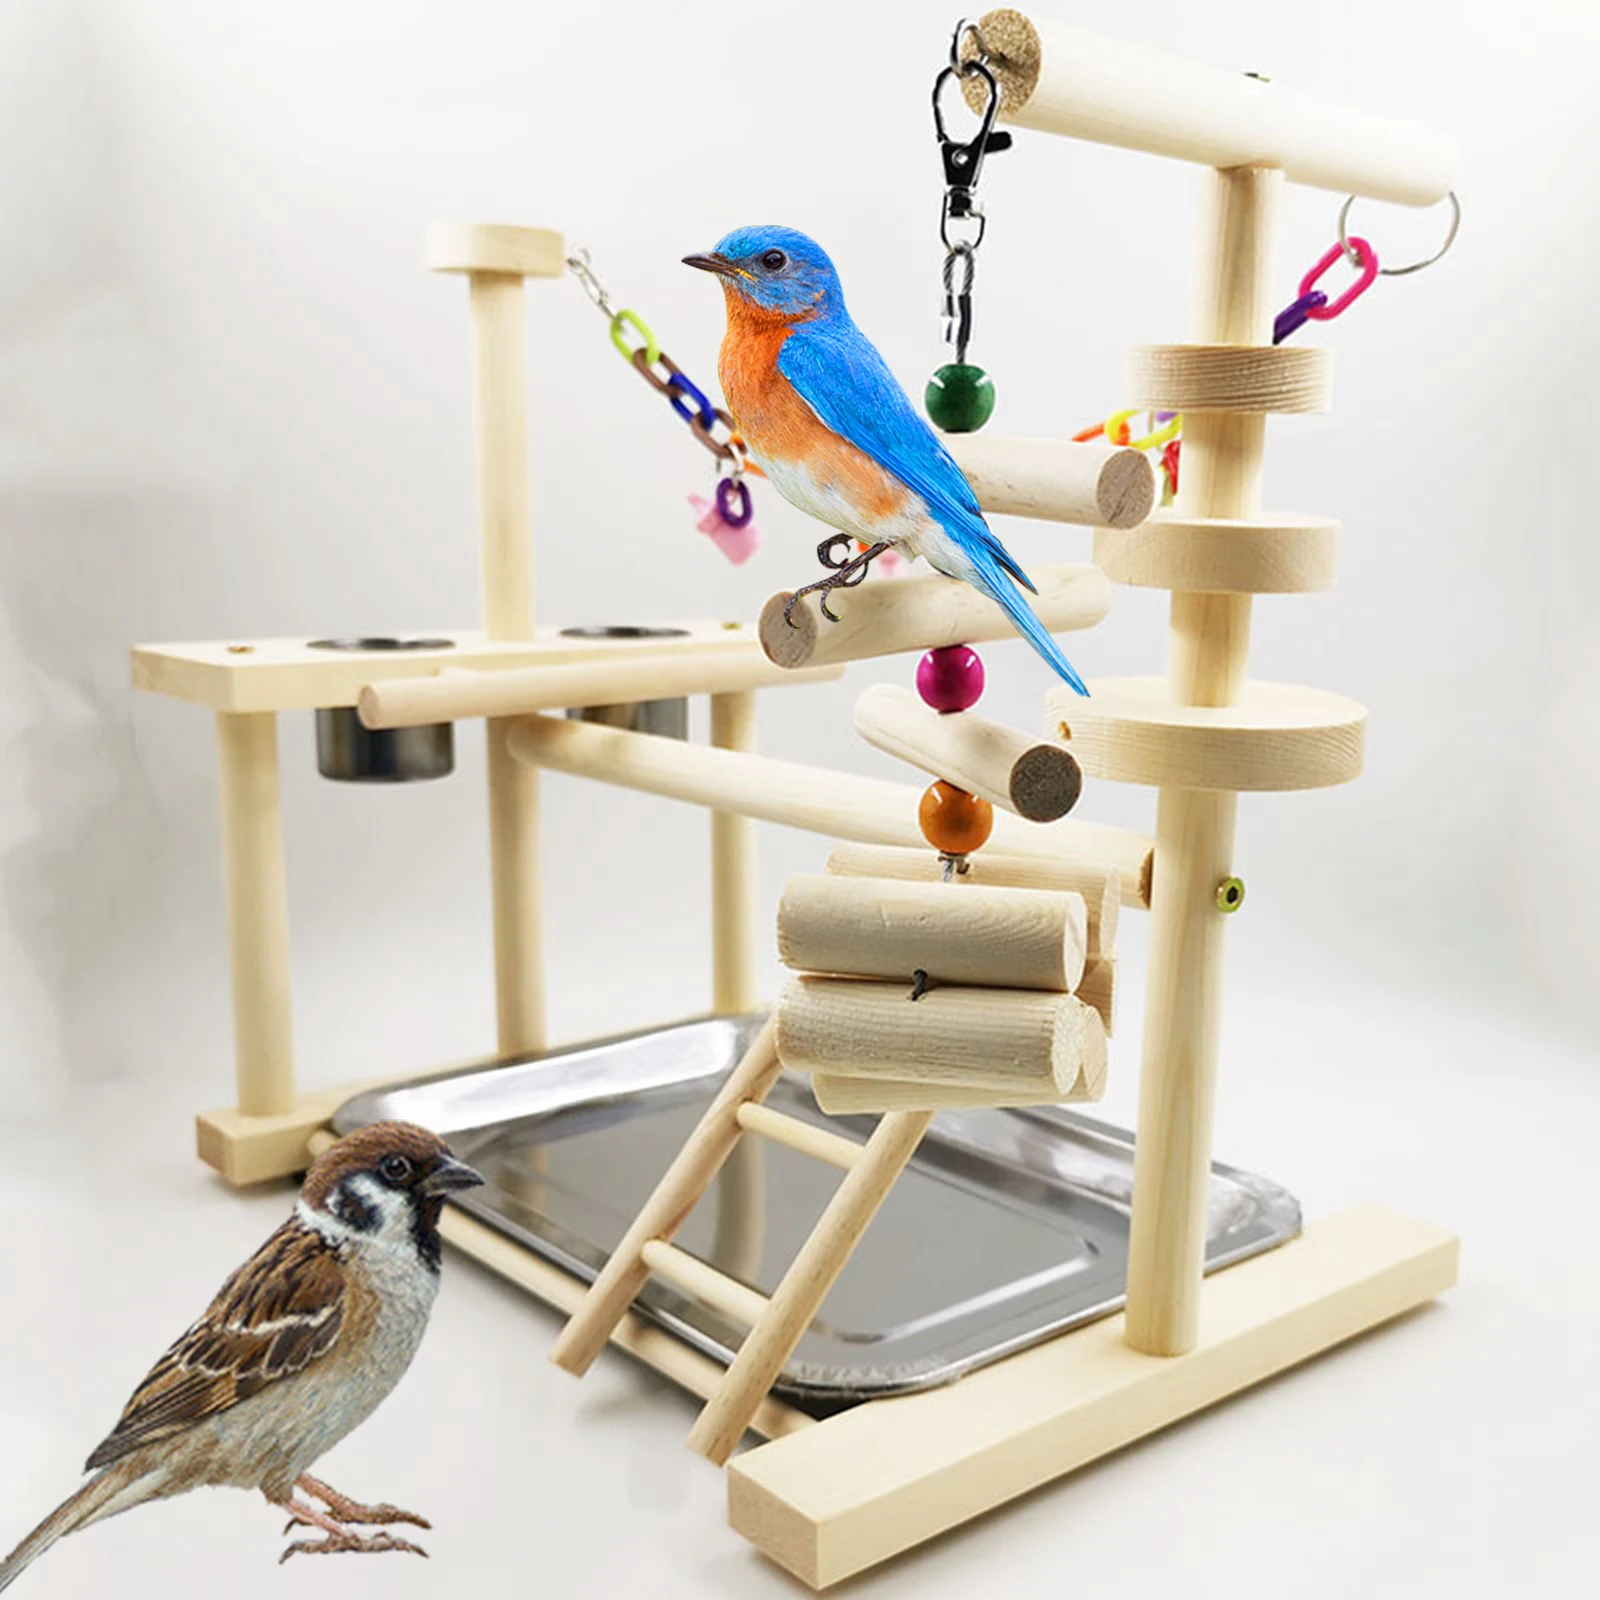 Parrot Playstands With Cup Toys Parrot Play Perch Bird Parrot Playstand Stand Playground Wooden Perch Climbing Hanging Ladder